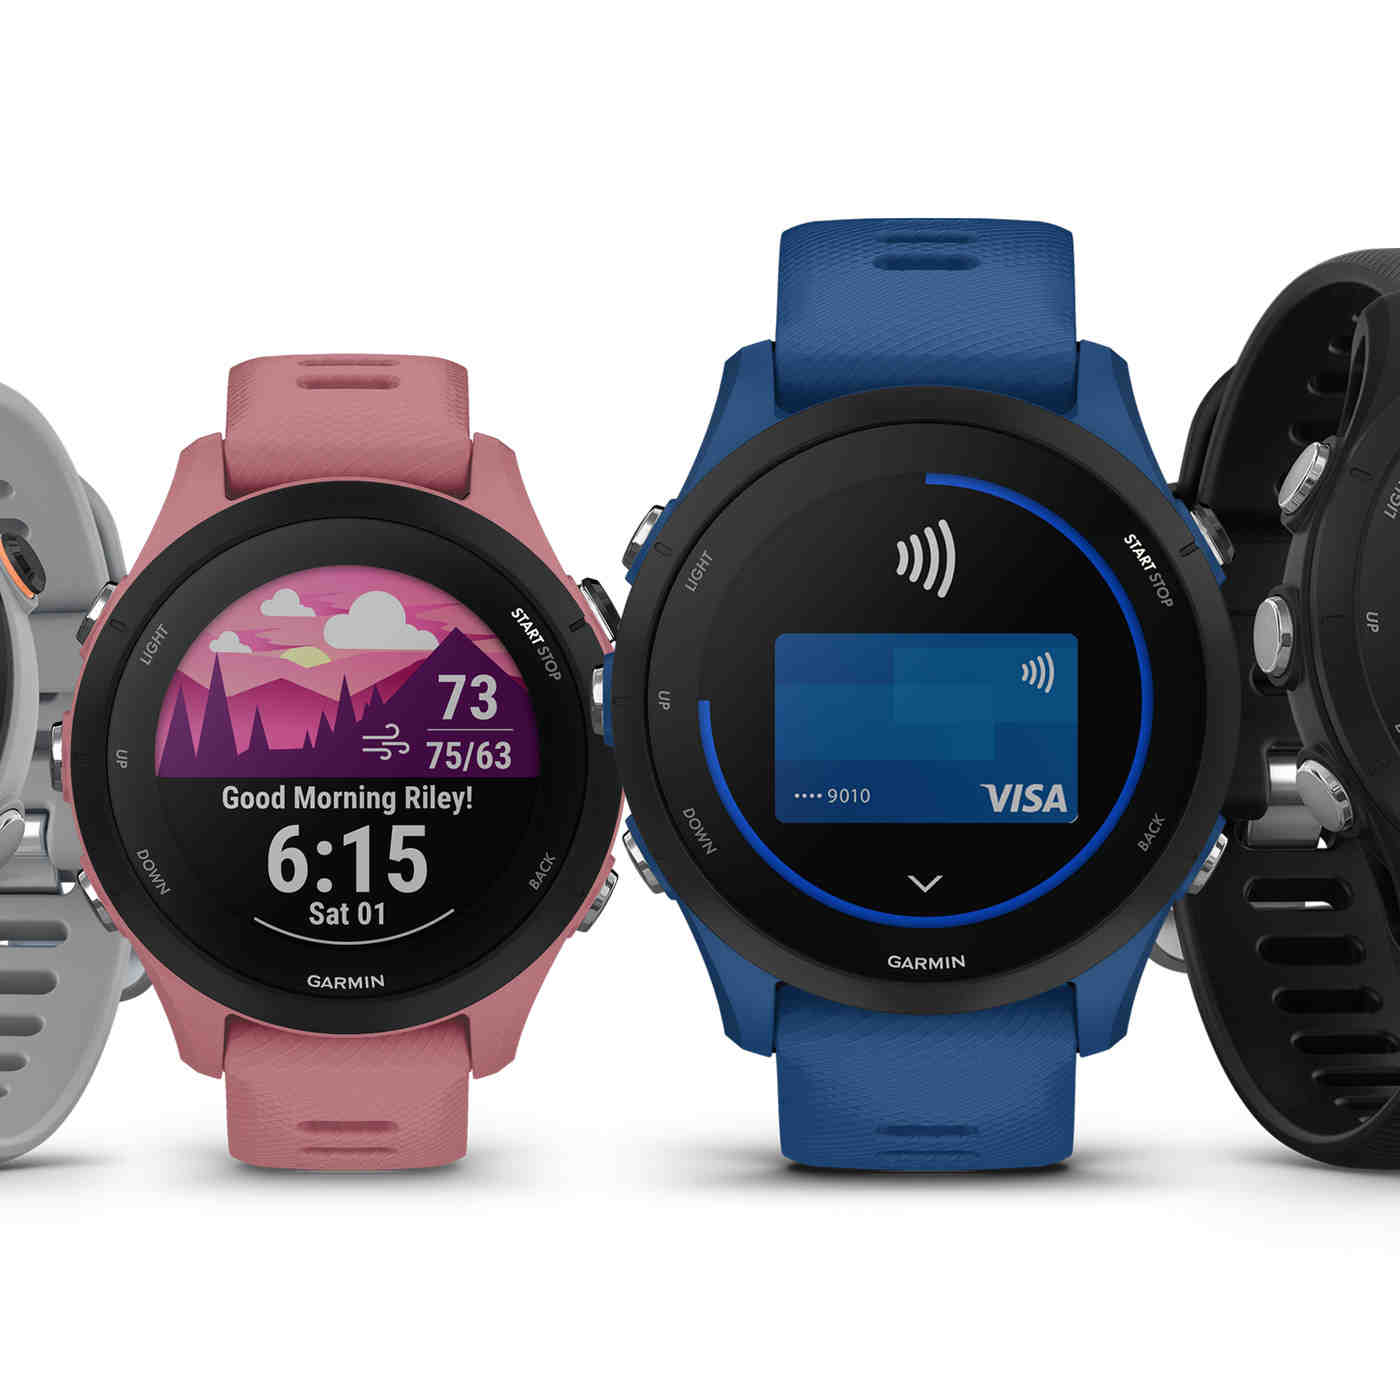 How accurate are Garmin watches for steps?